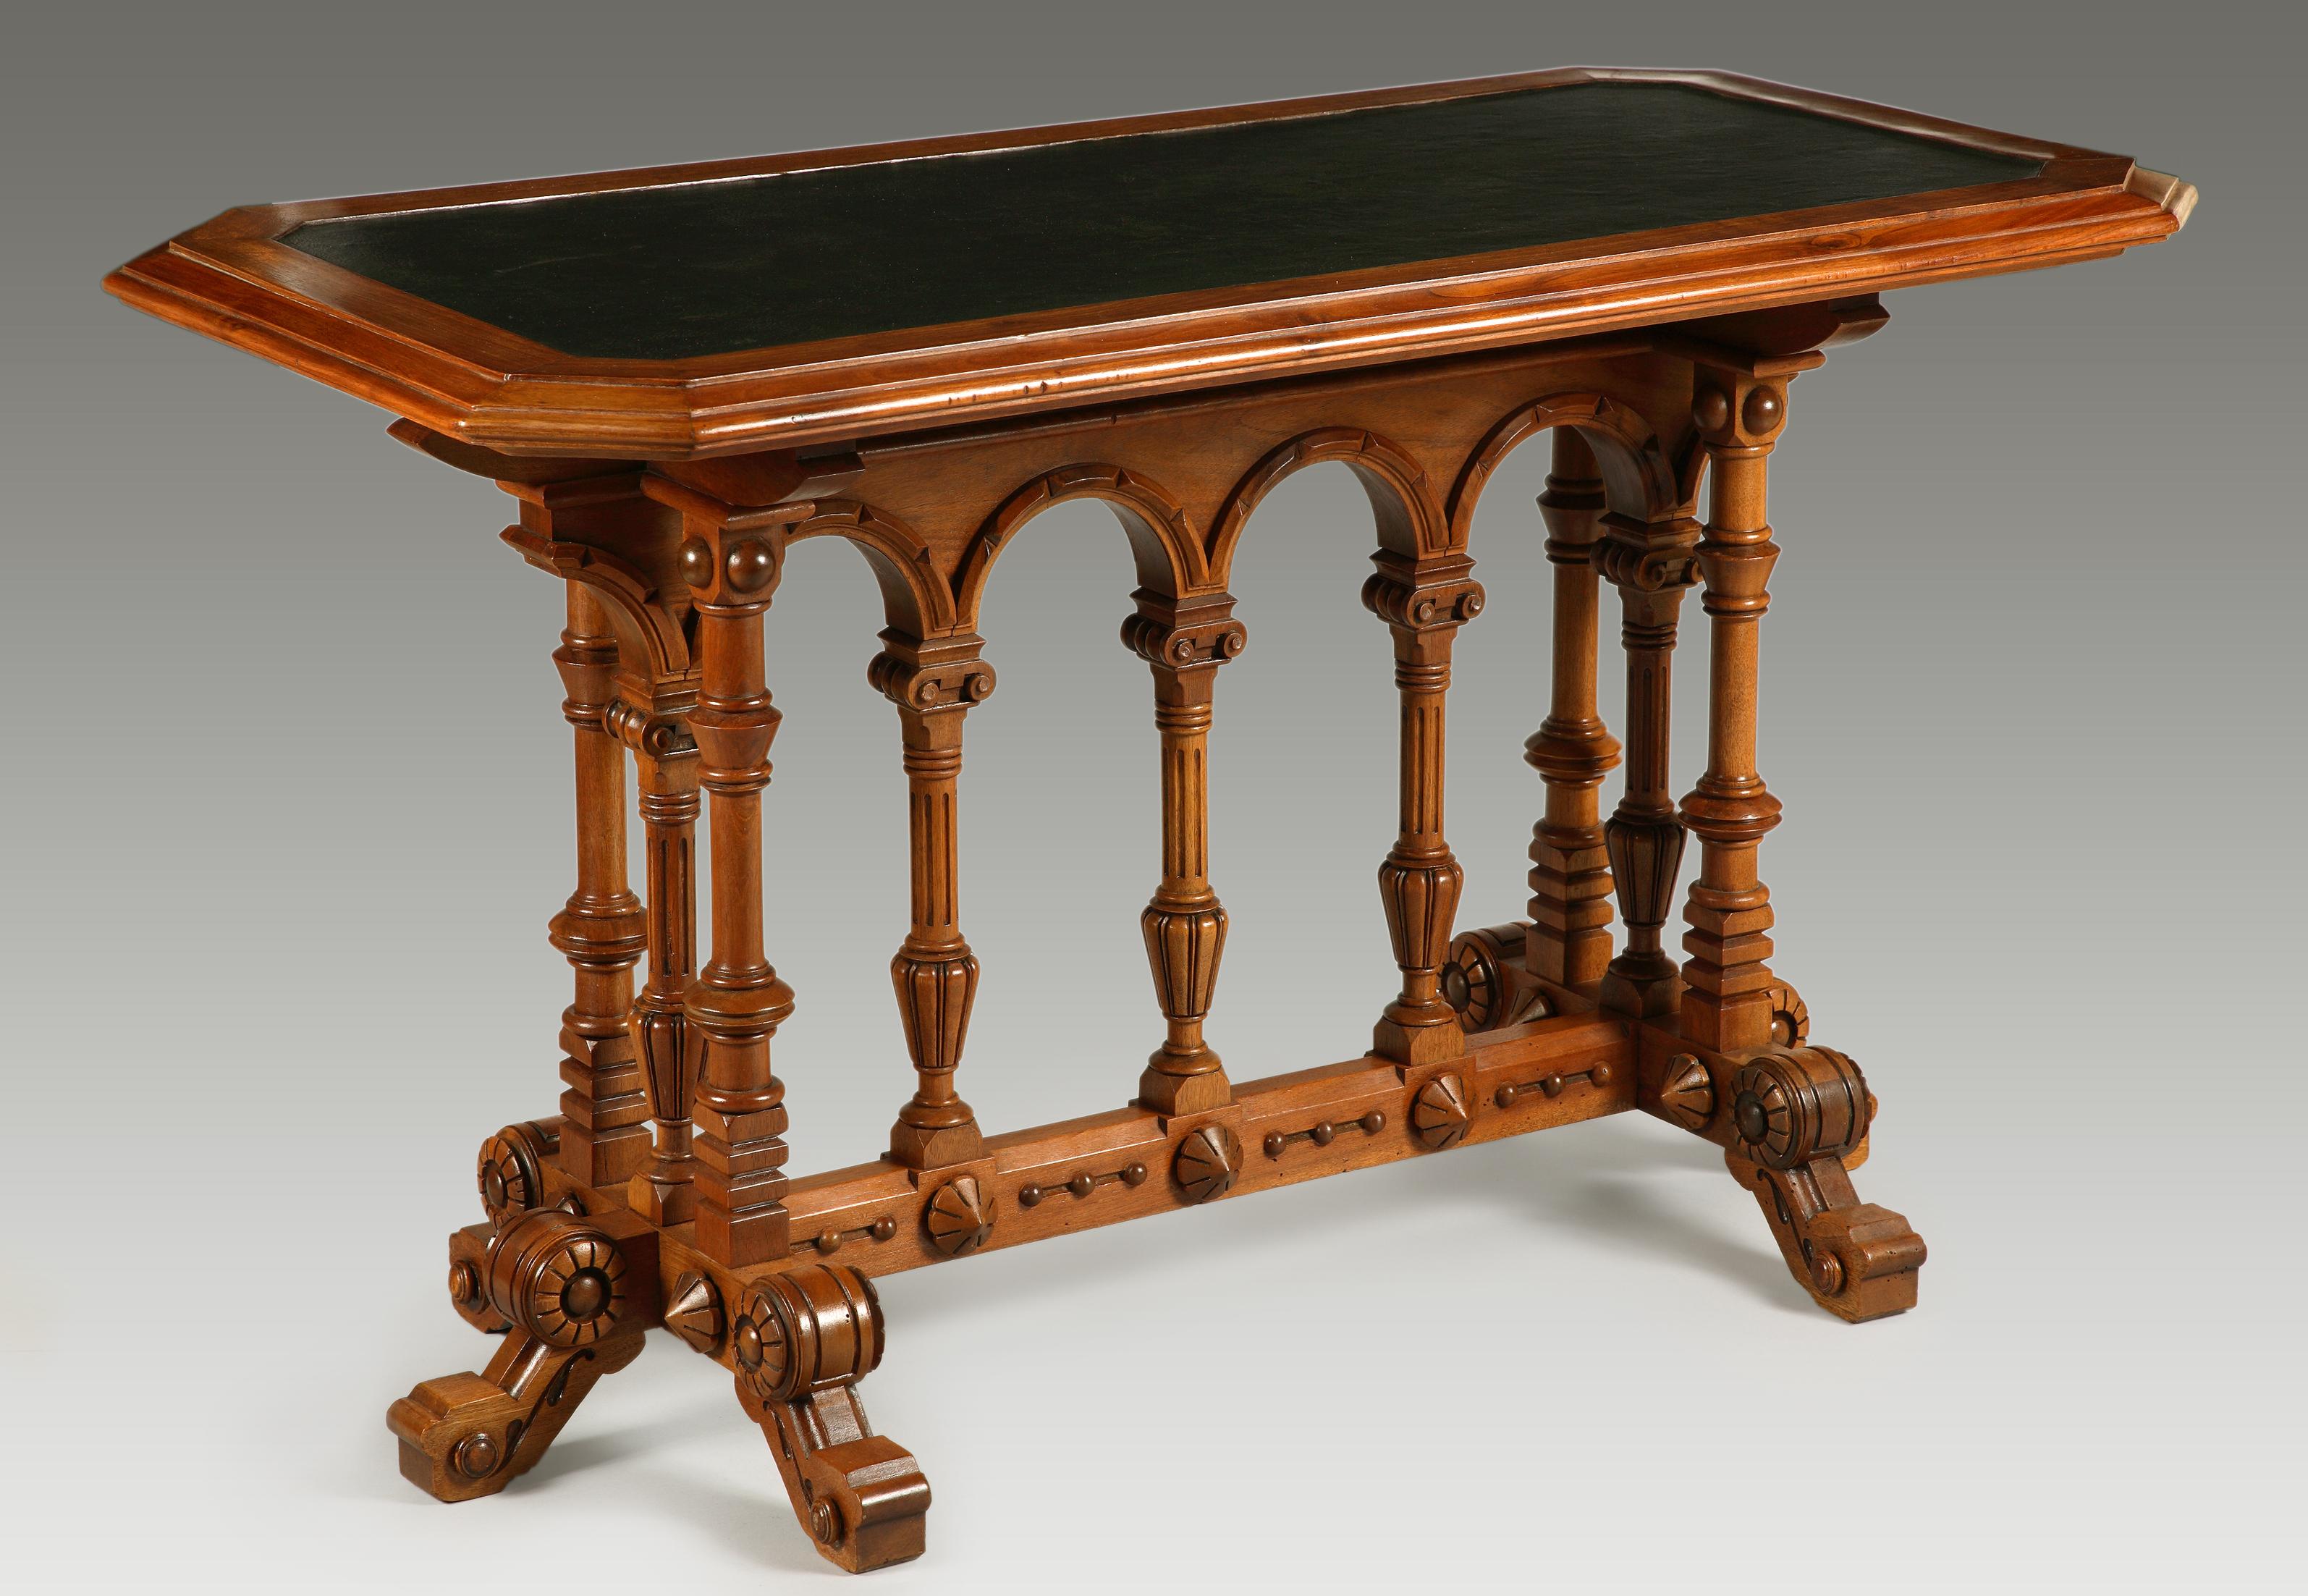 Carved wood table with Renaissance style motifs. Raised on six legs joined by a stretcher, with architectural decoration of ionic columns and blind arches. Top with leather inset writing surface.